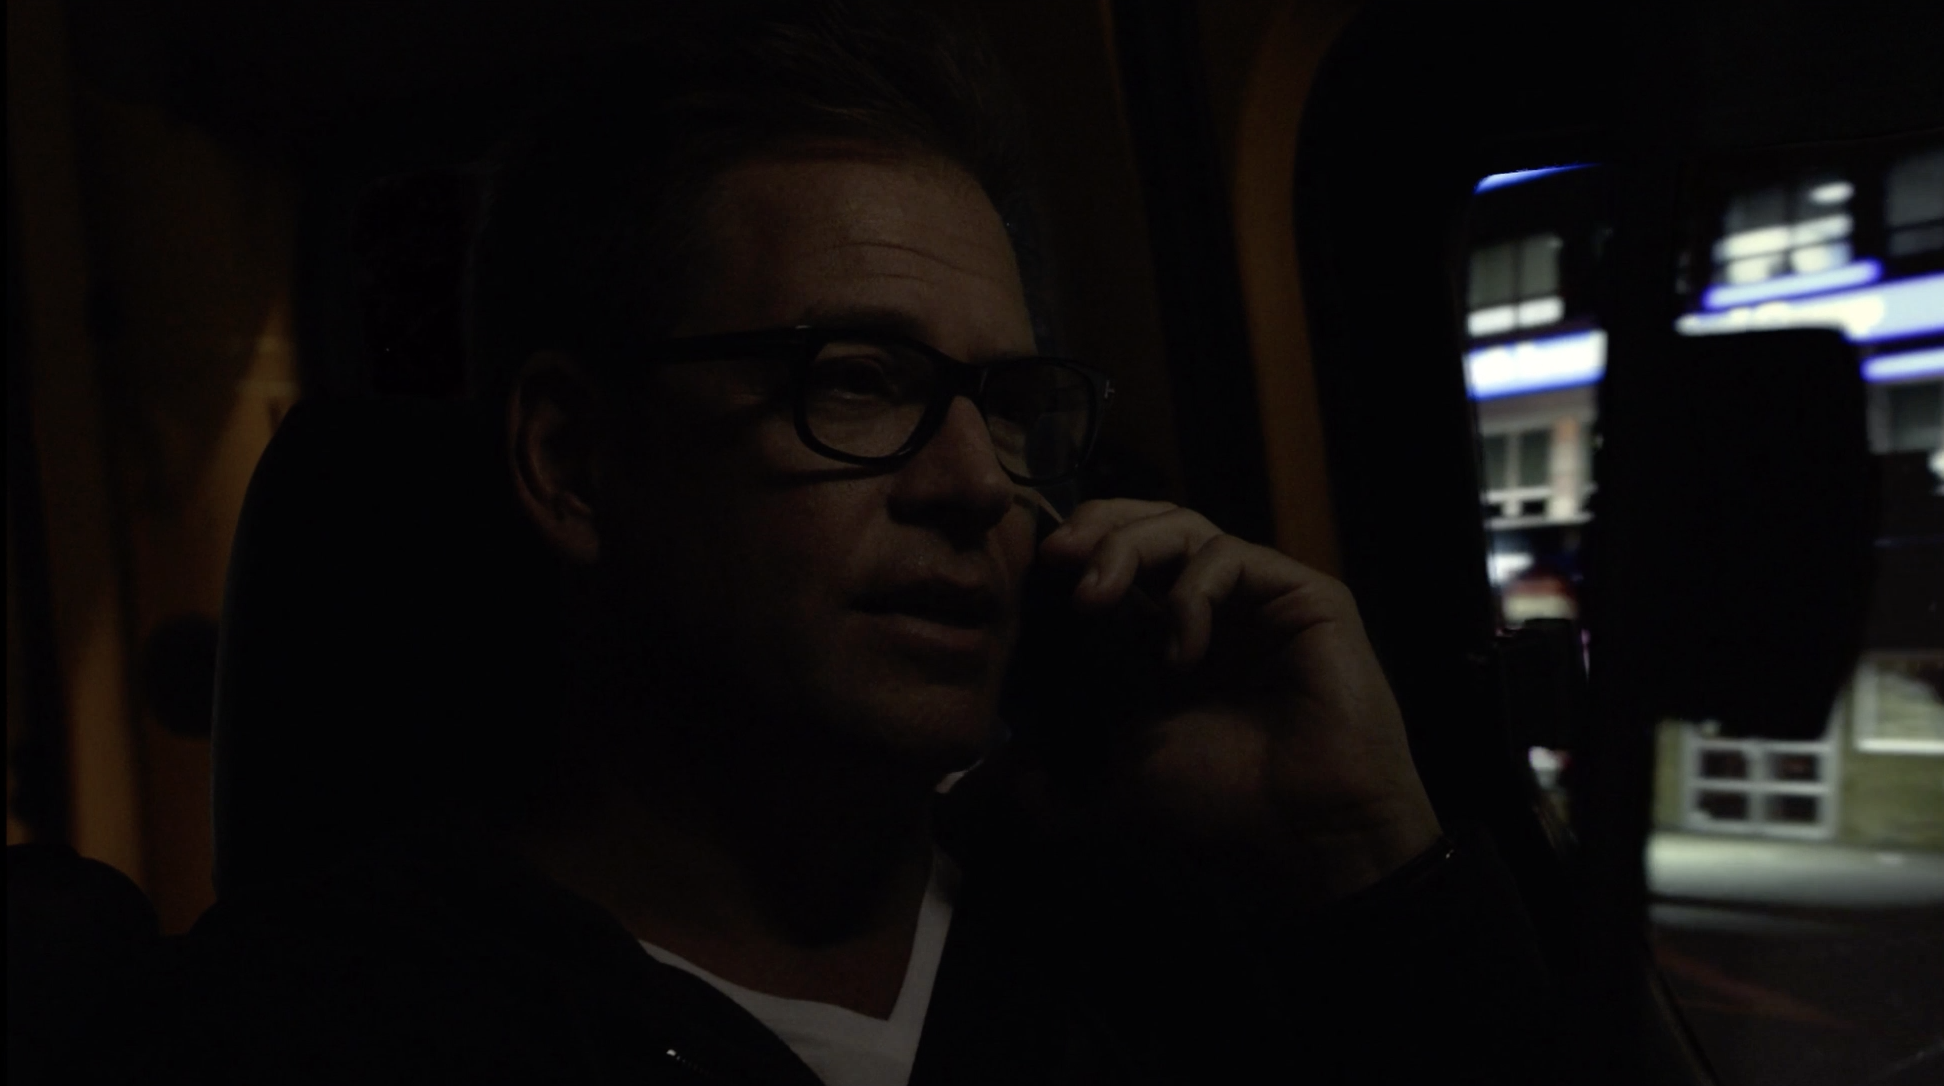 Bull Driving Footage New York City S03E01 6.png